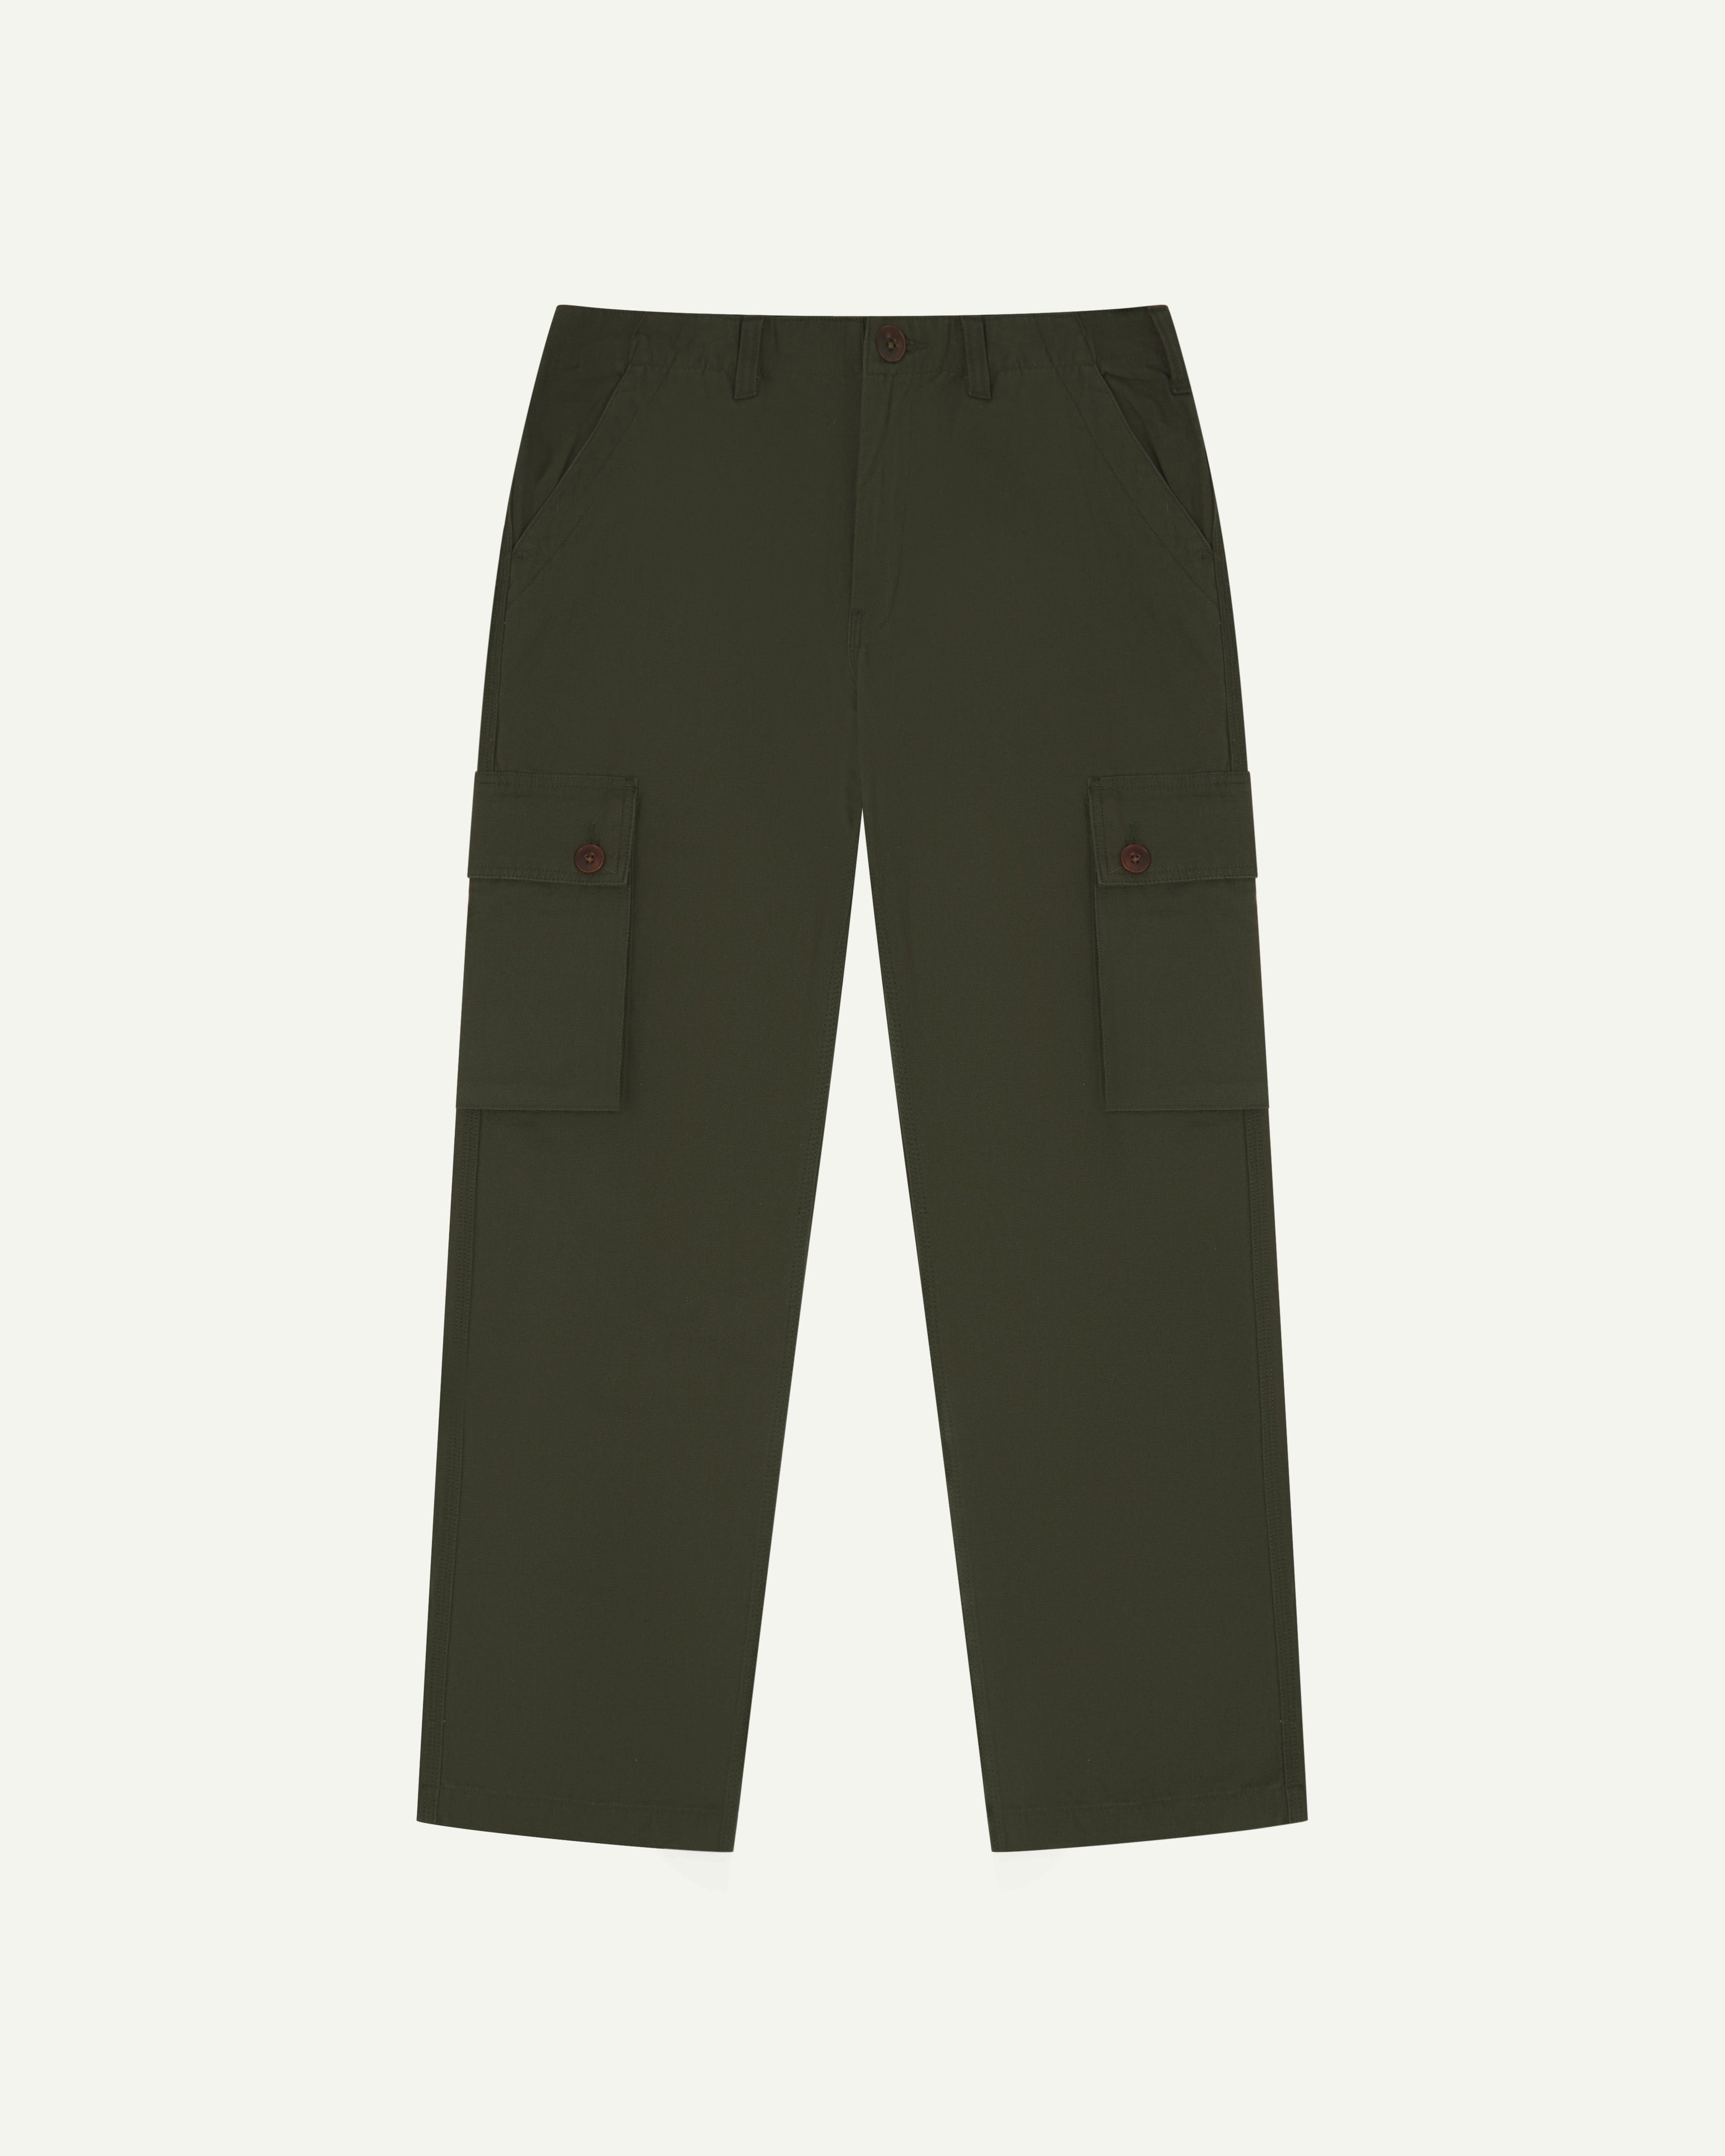 Front flat view of #5014 Uskees men's organic cotton dark green cargo trousers showing corozo buttons on pockets